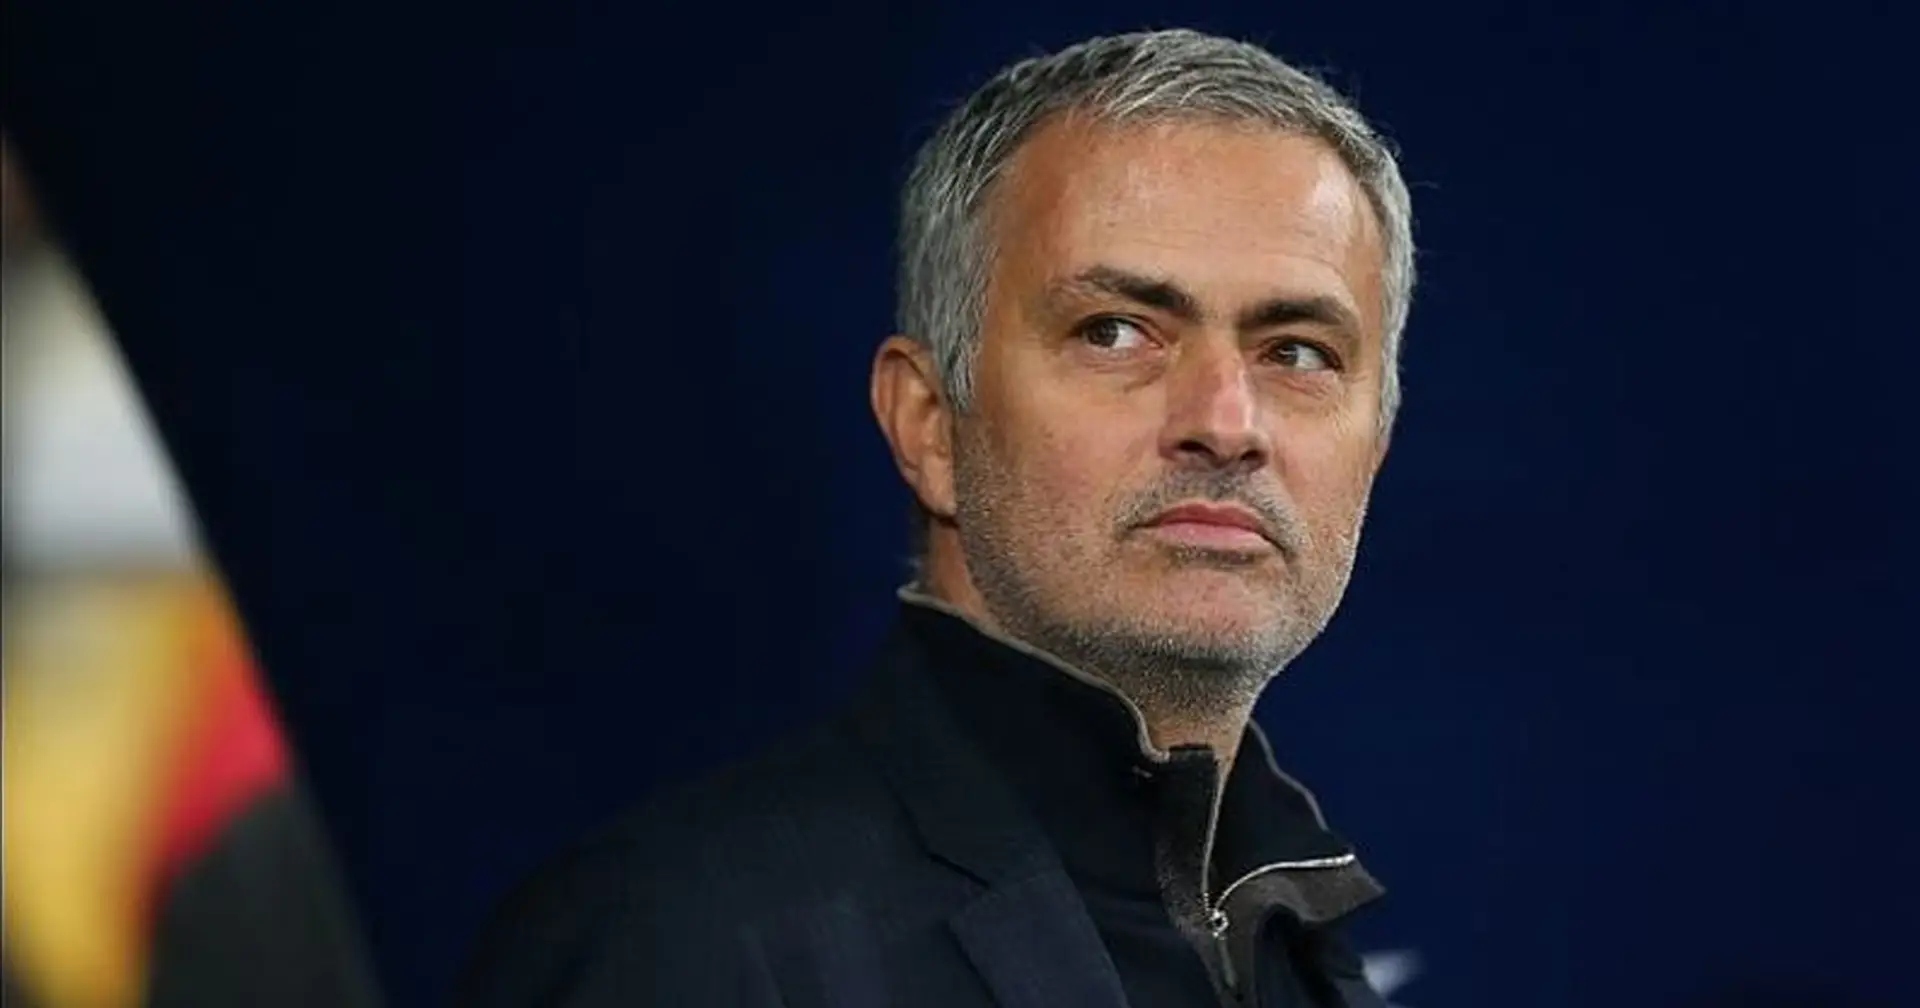 Chelsea stance on appointing Mourinho as head coach revealed (reliability: 5 stars)